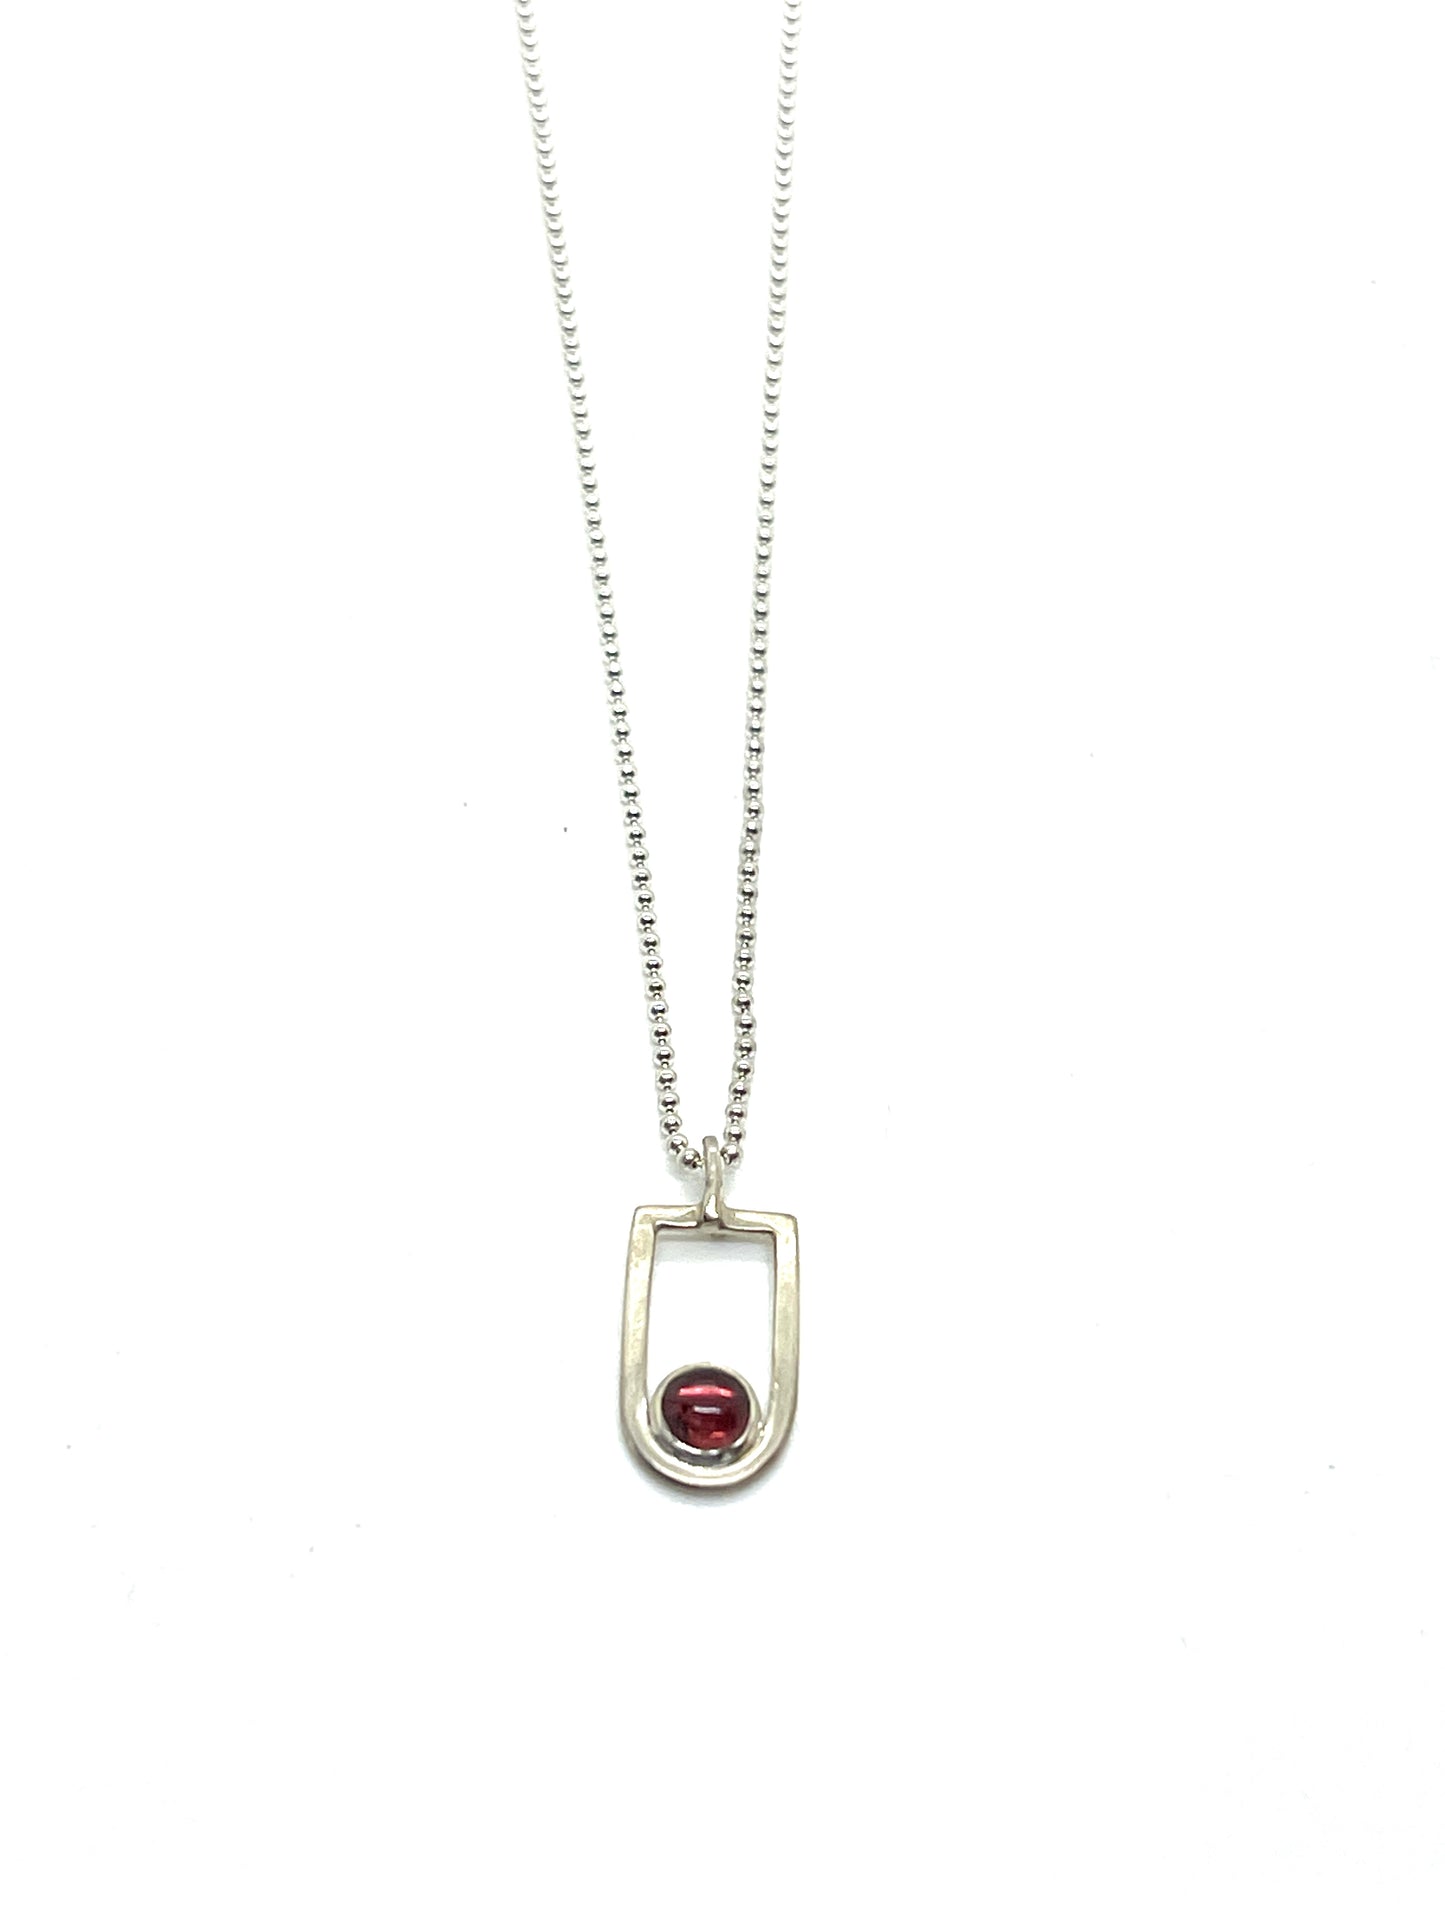 Pink tourmaline and sterling silver necklace